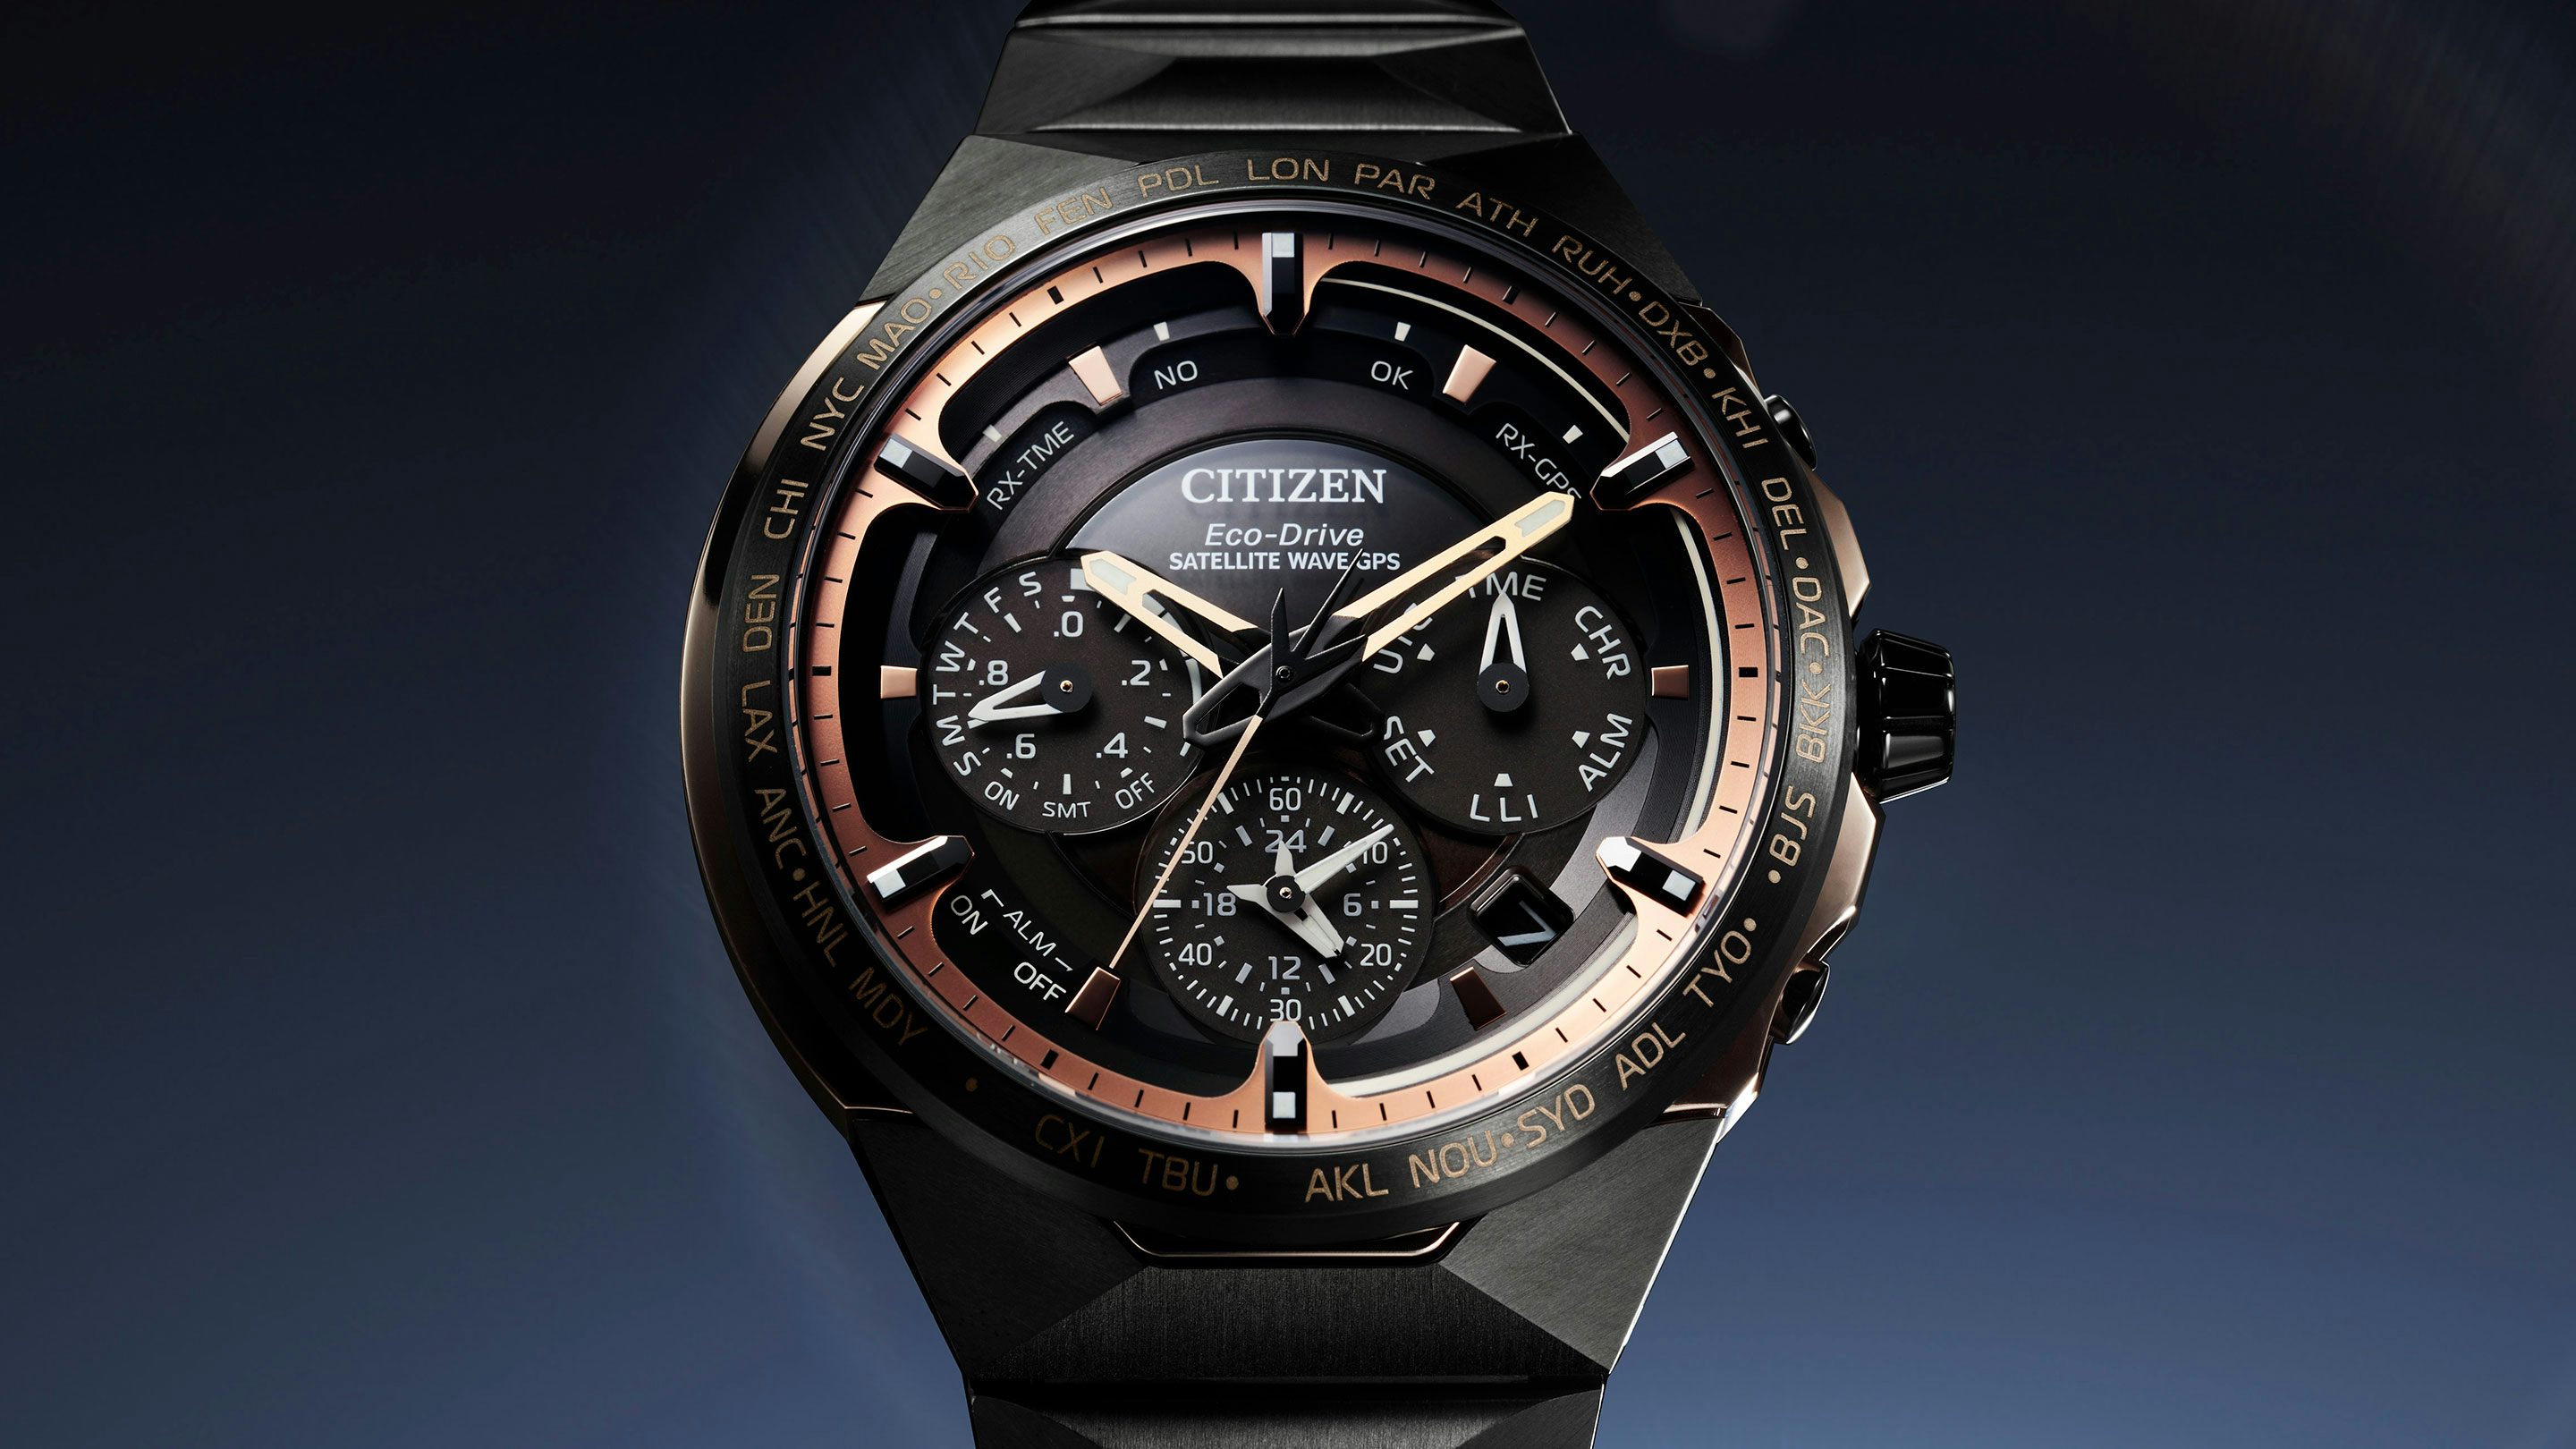 Introducing: The Citizen Satellite Wave GPS F950 Titanium 50th Anniversary  Limited Edition - Hodinkee